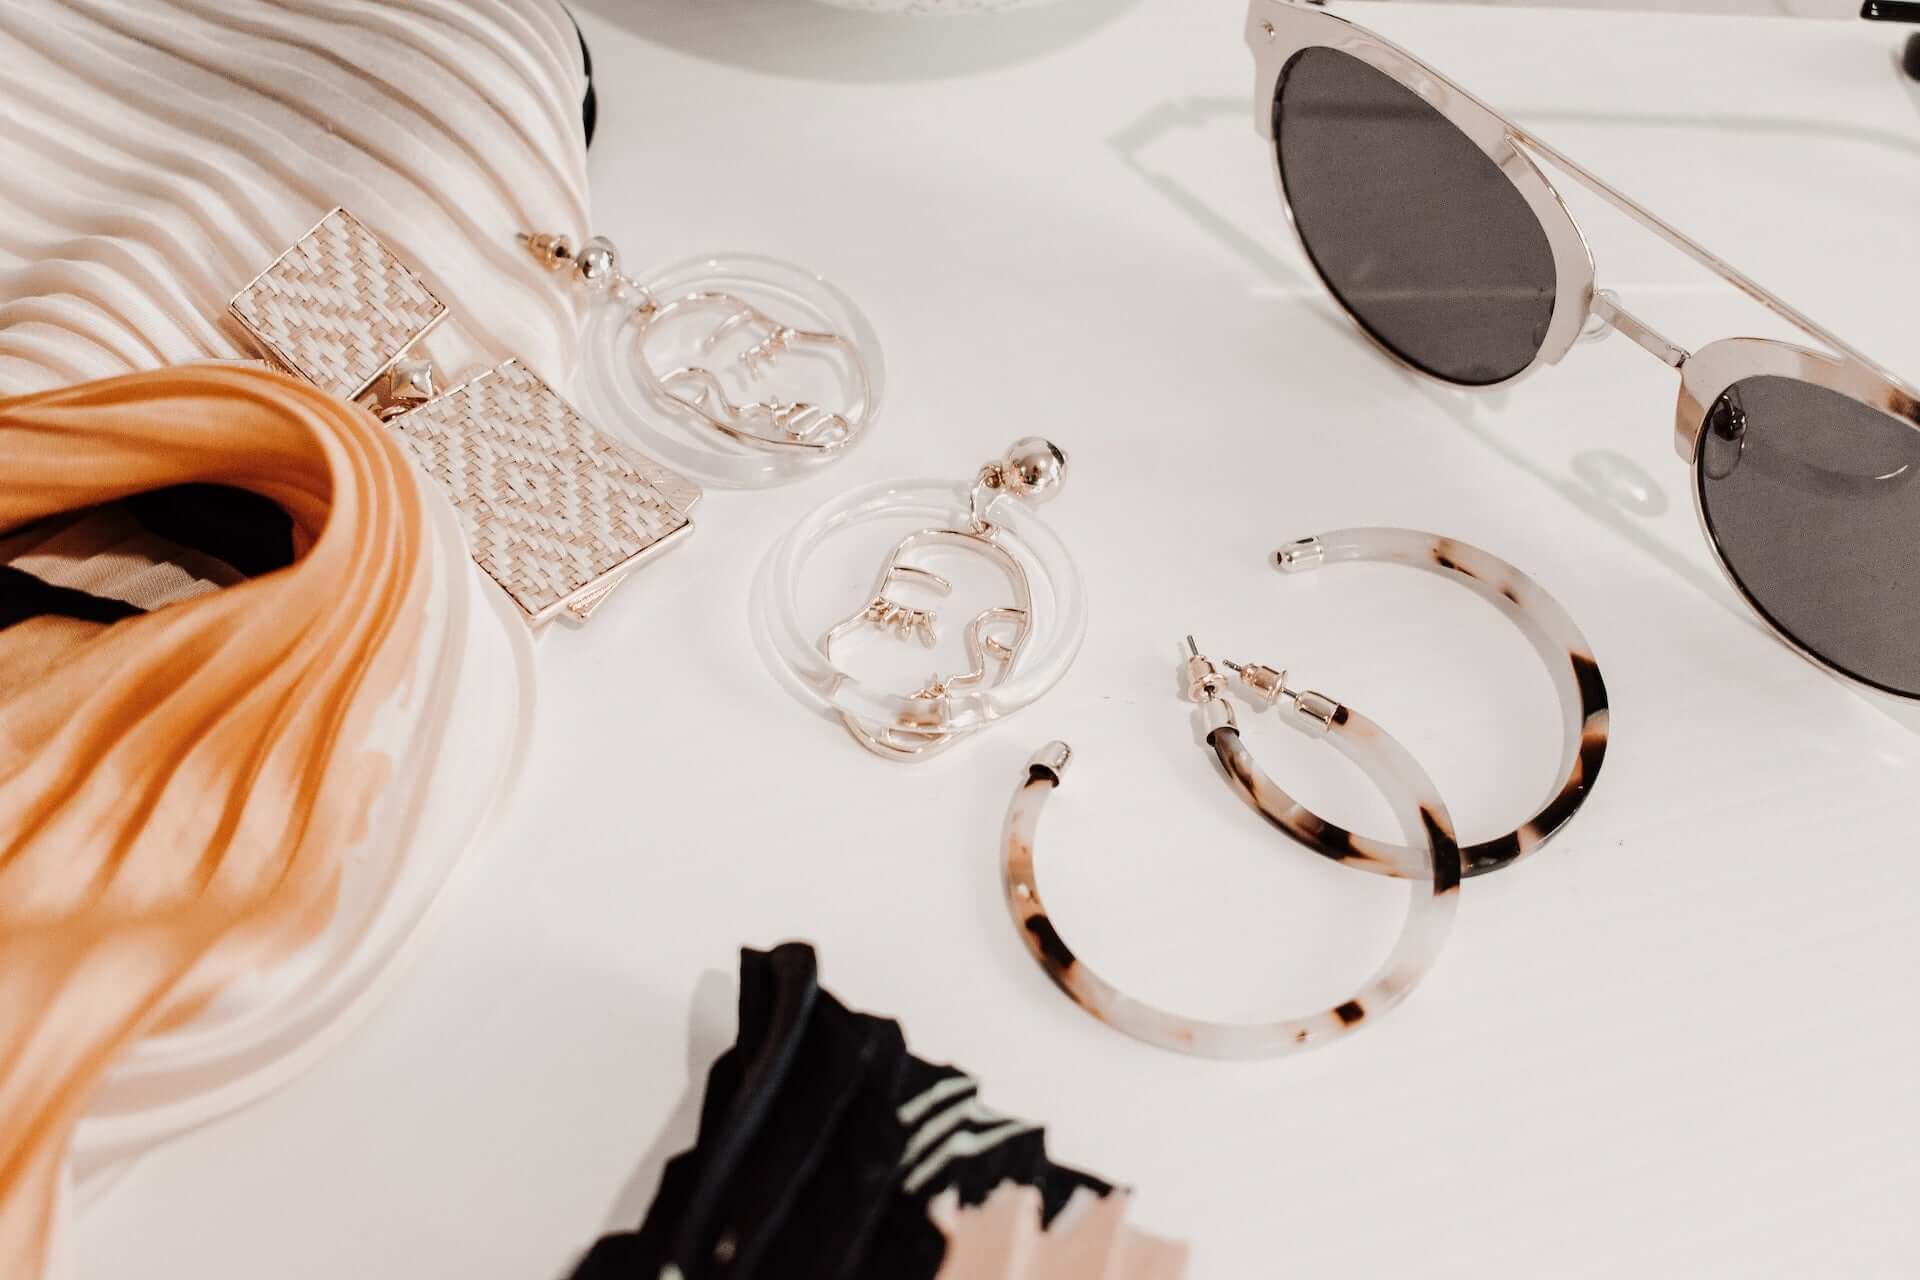 A flatlay of various accessories including hoop earrings and a pair of sunglasses.